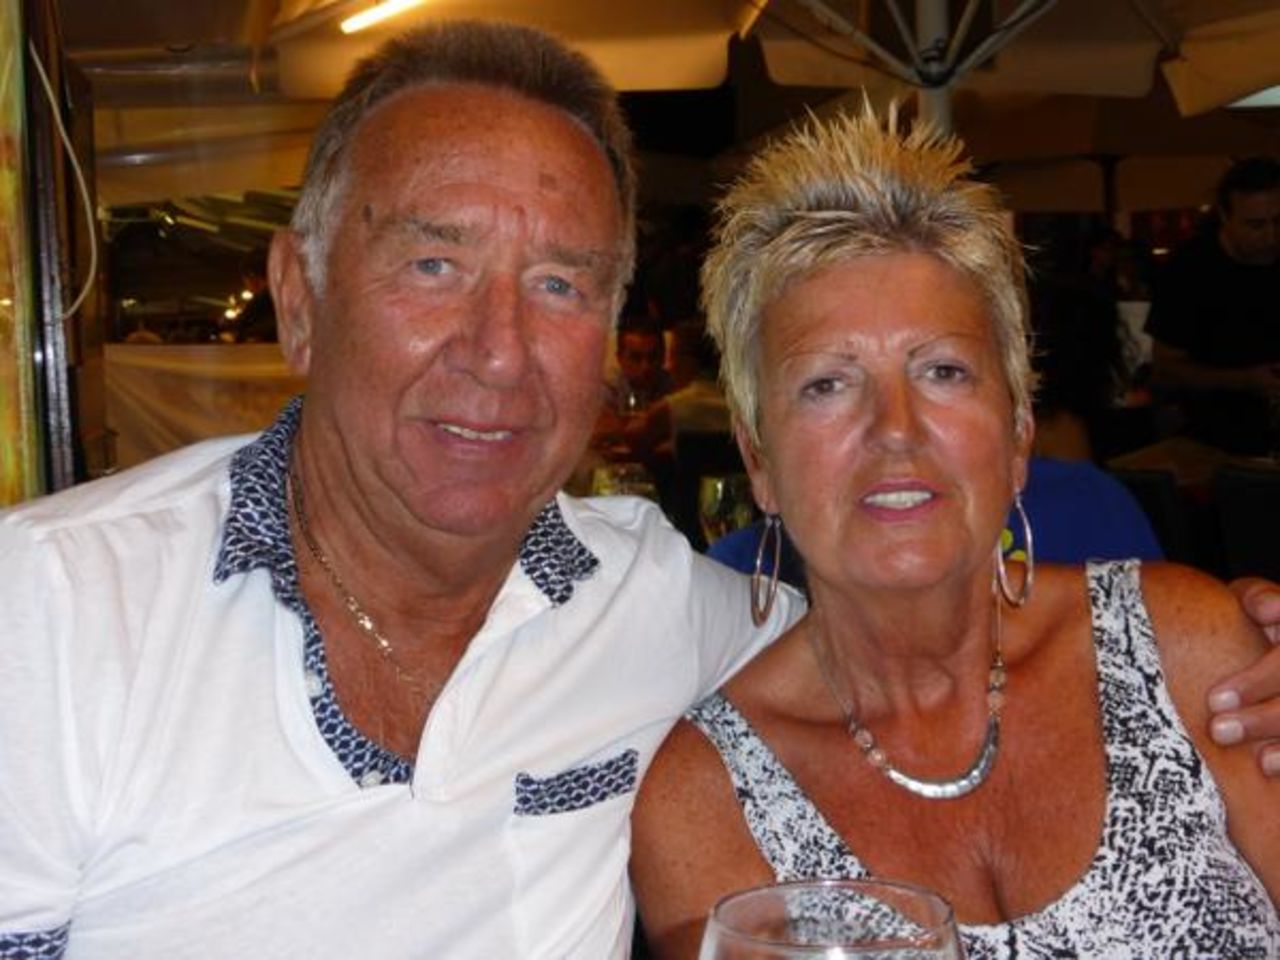 For four days after the attack, the Stocker family tried desperately to reach John and Janet Stocker, on holiday in Sousse. Hotel staff said the couple's clothes were still hanging in their rooms but by Tuesday, Tunisian authorities confirmed they both had also been killed.  